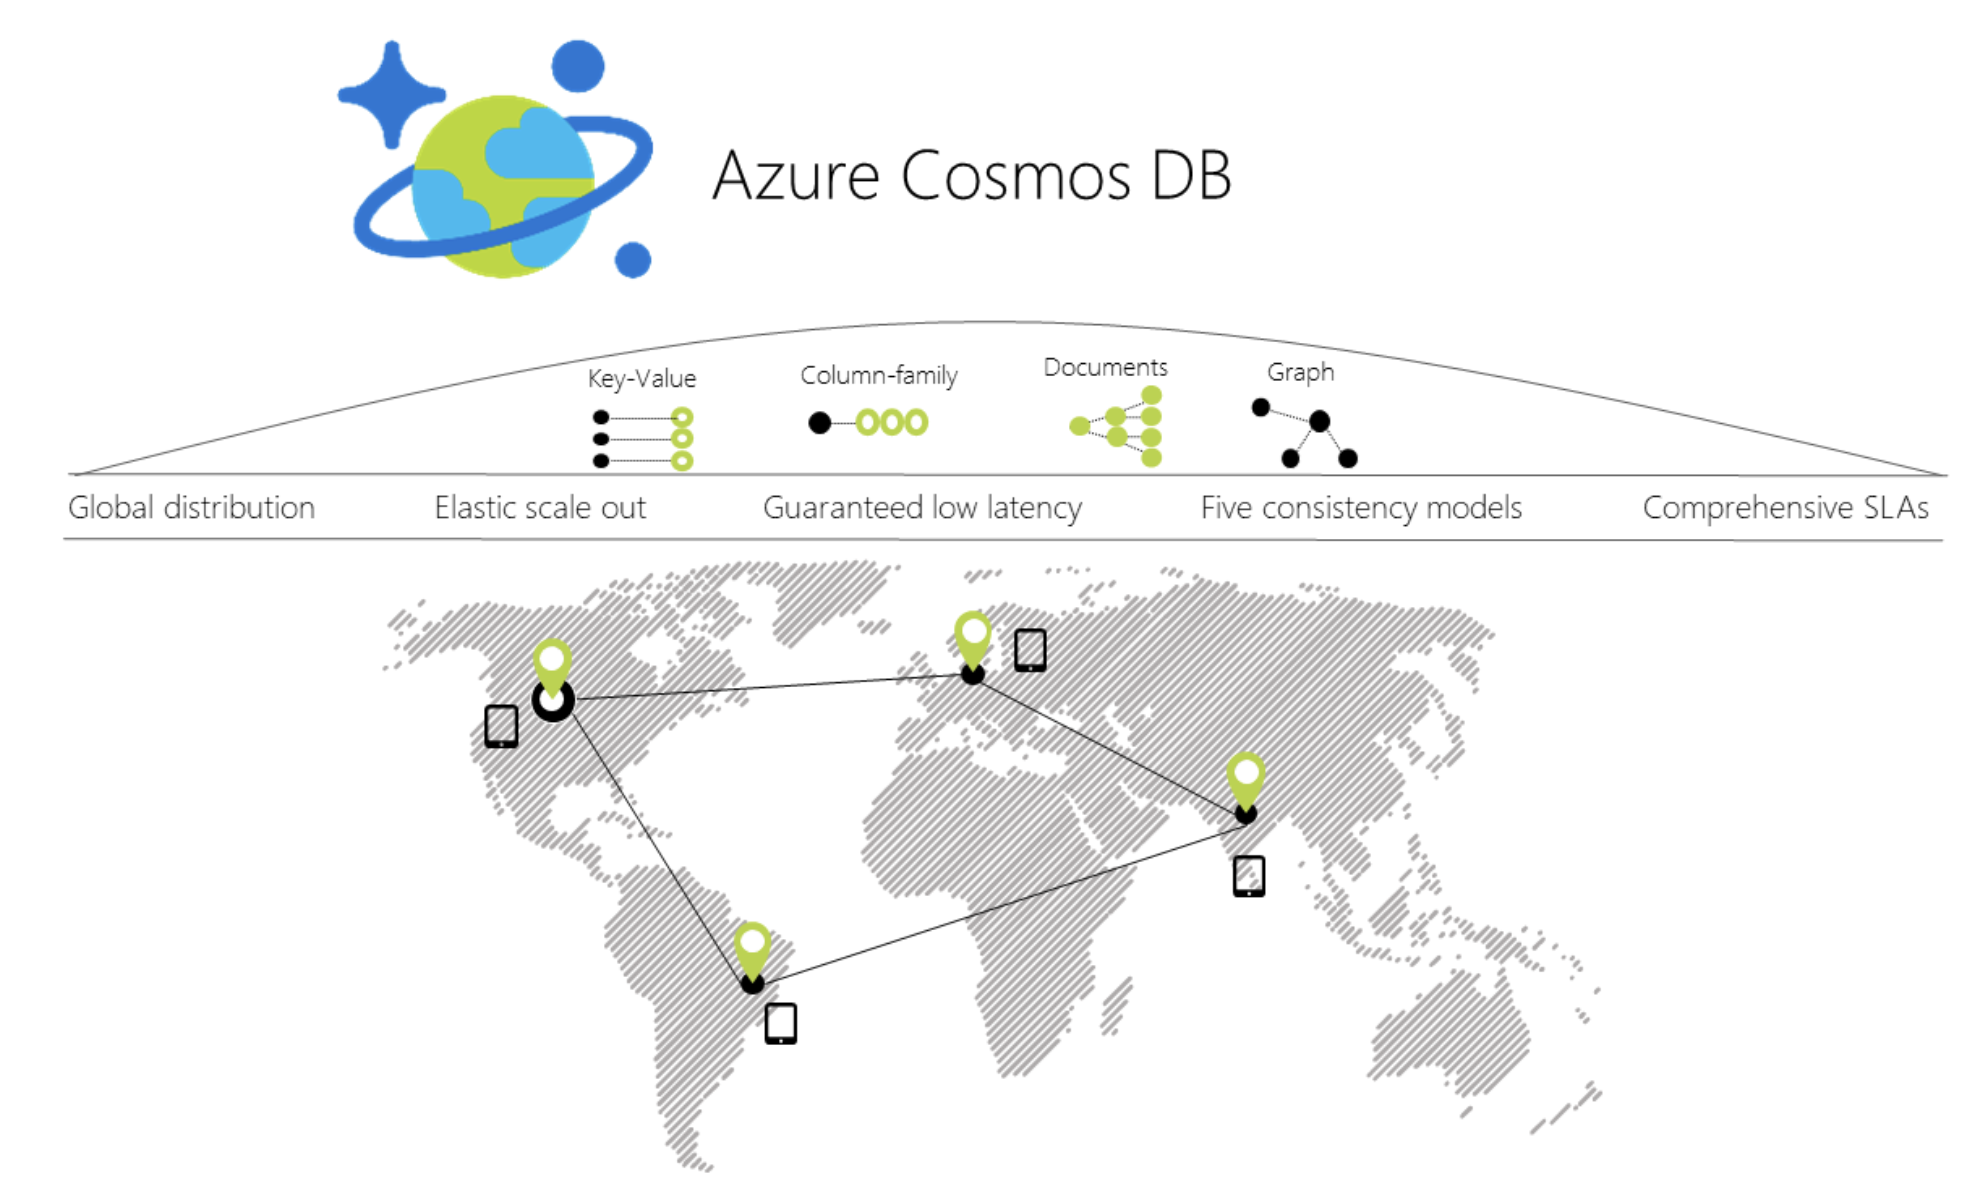 Diagram showing the Azure Cosmos DB global distribution.